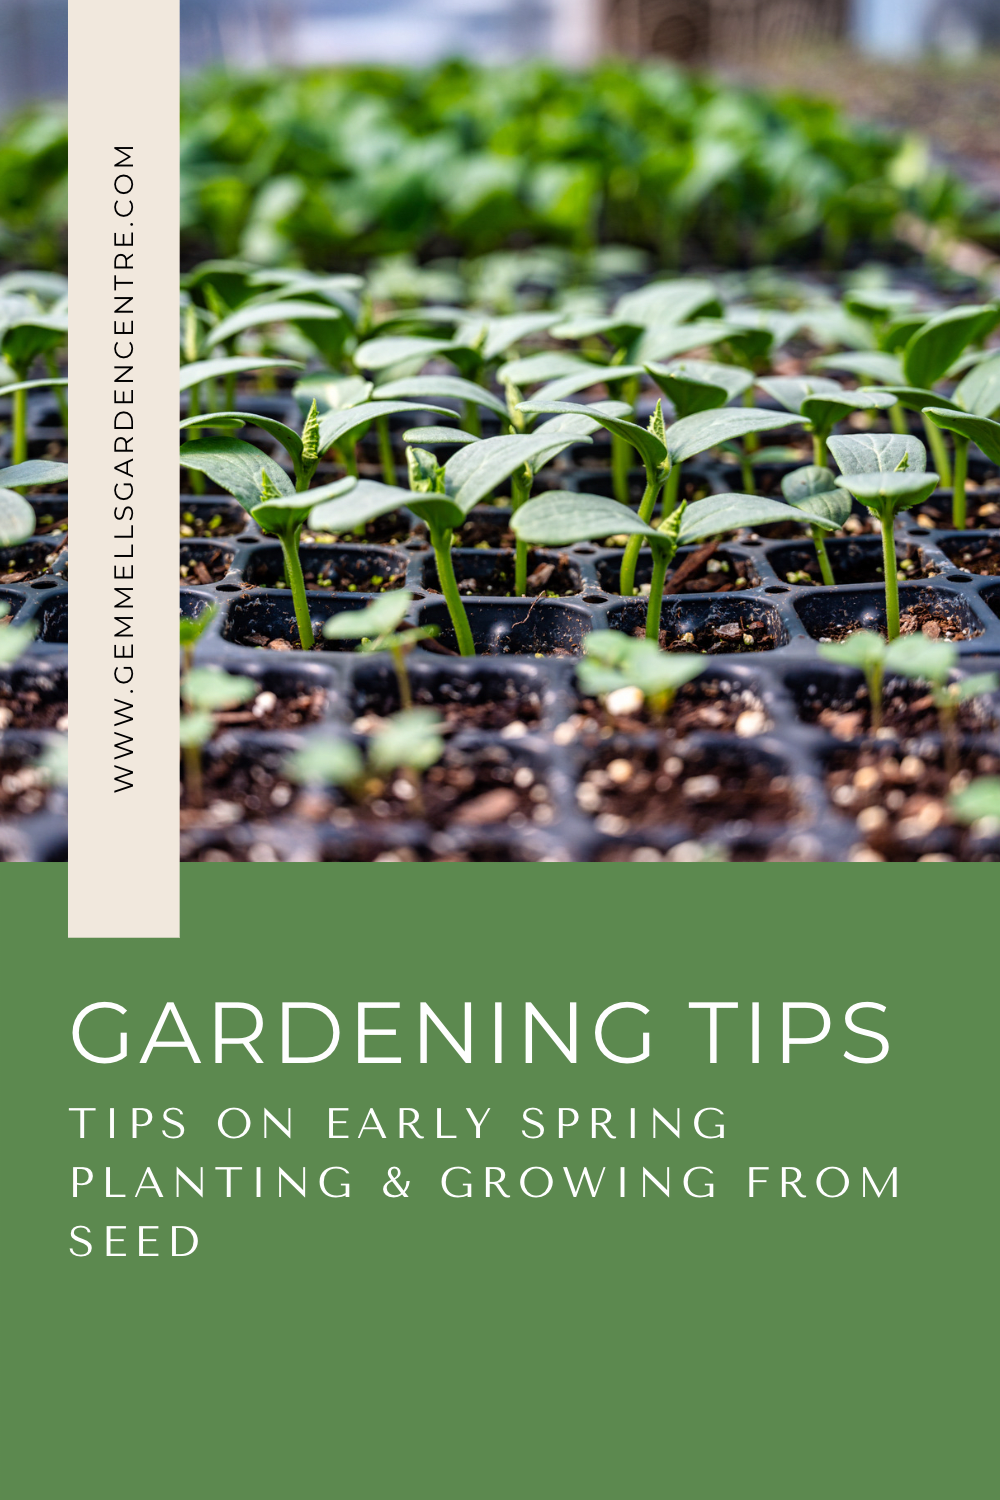 Tips on Early Spring Planting & Growing from Seed 